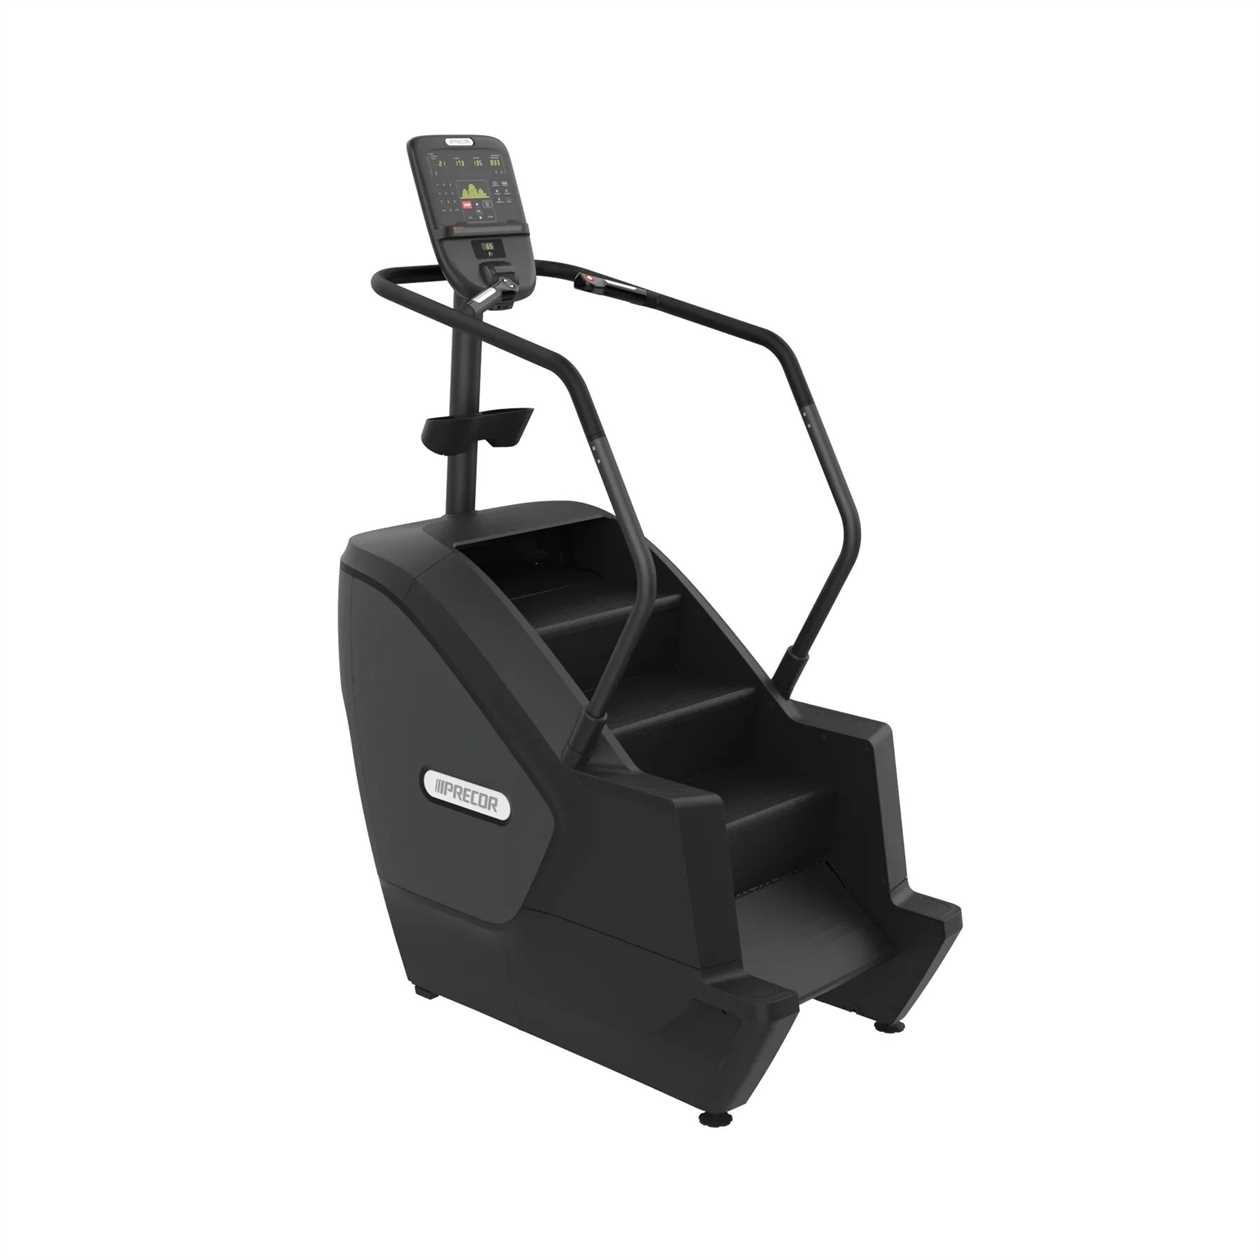 New(other) Precor SCL 835 Stair Climber AXPN Stepper